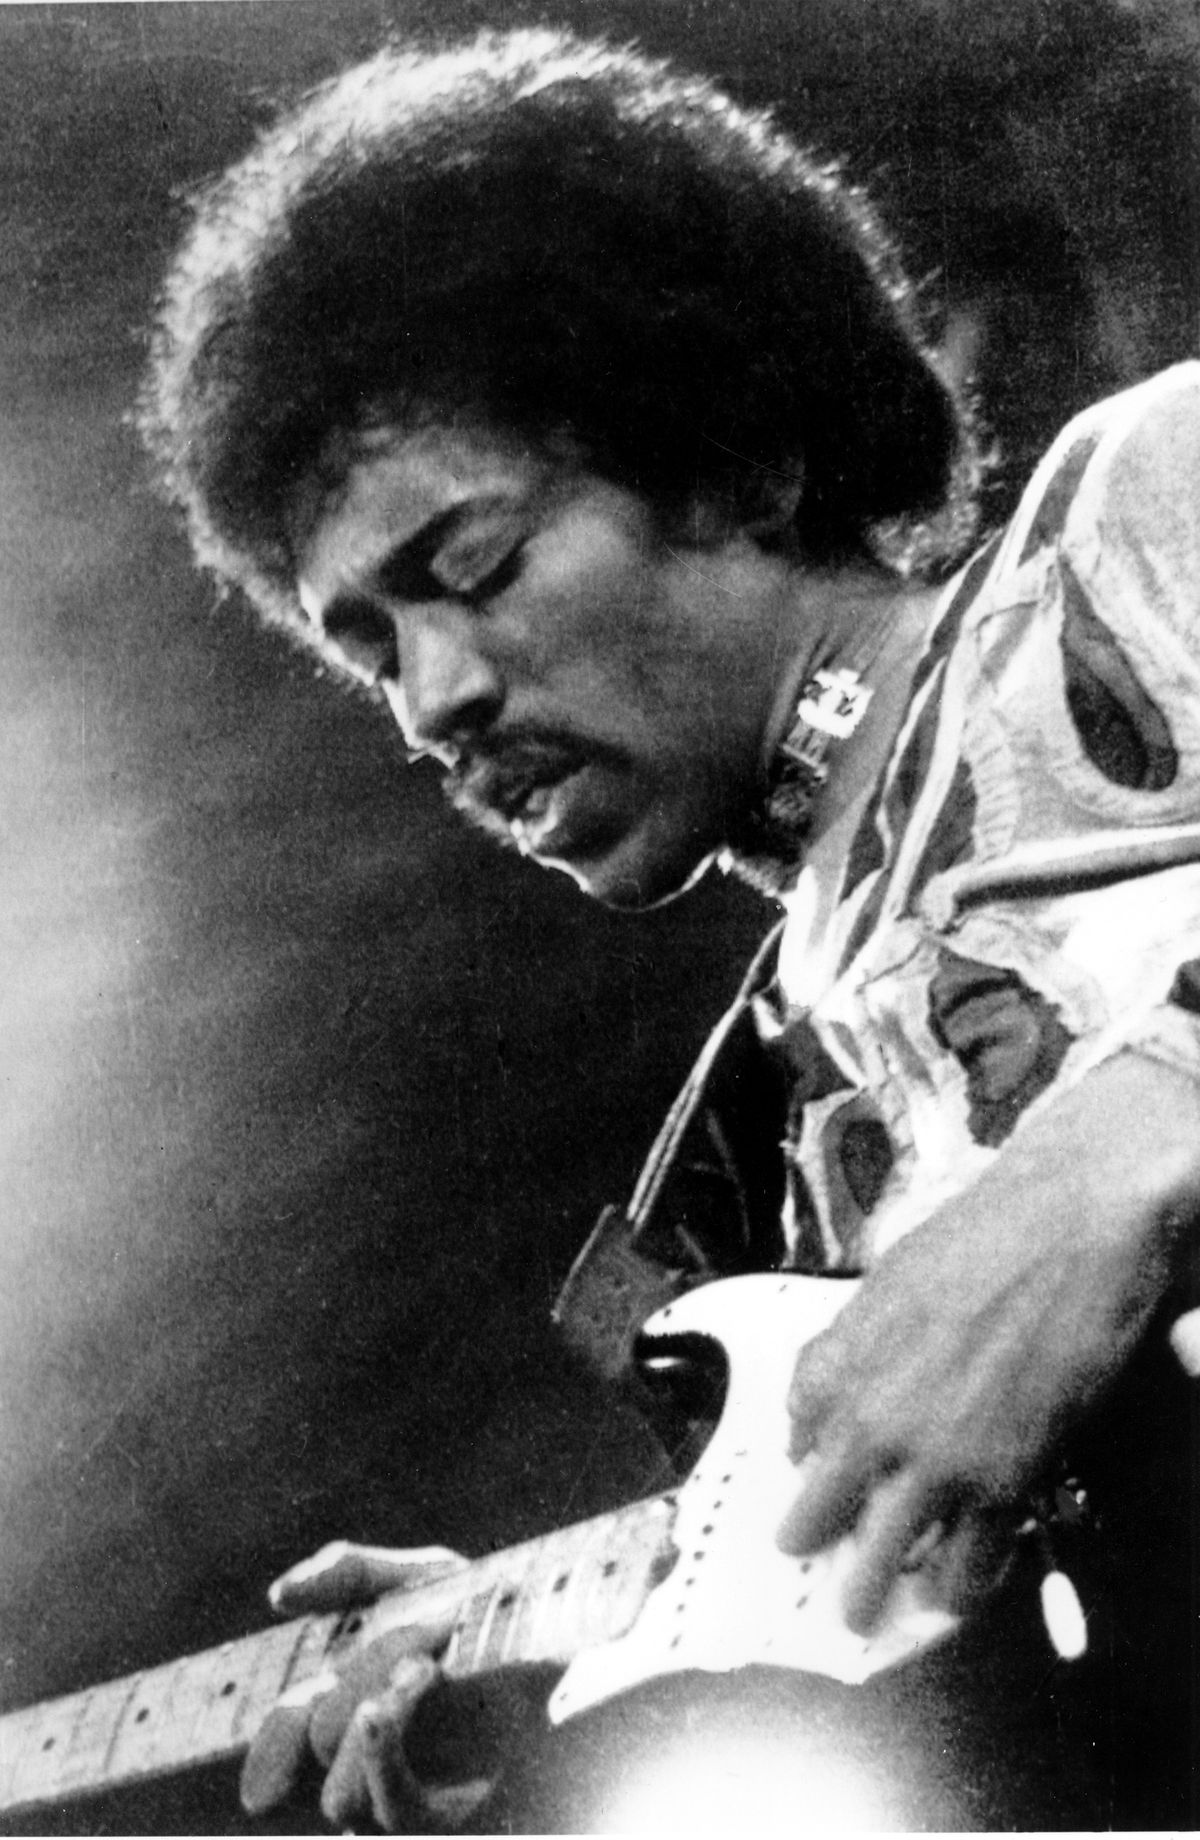 Rock ‘n’ roll guitarist Jimi Hendrix performs on the Isle of Wight in England in 1970. | AP